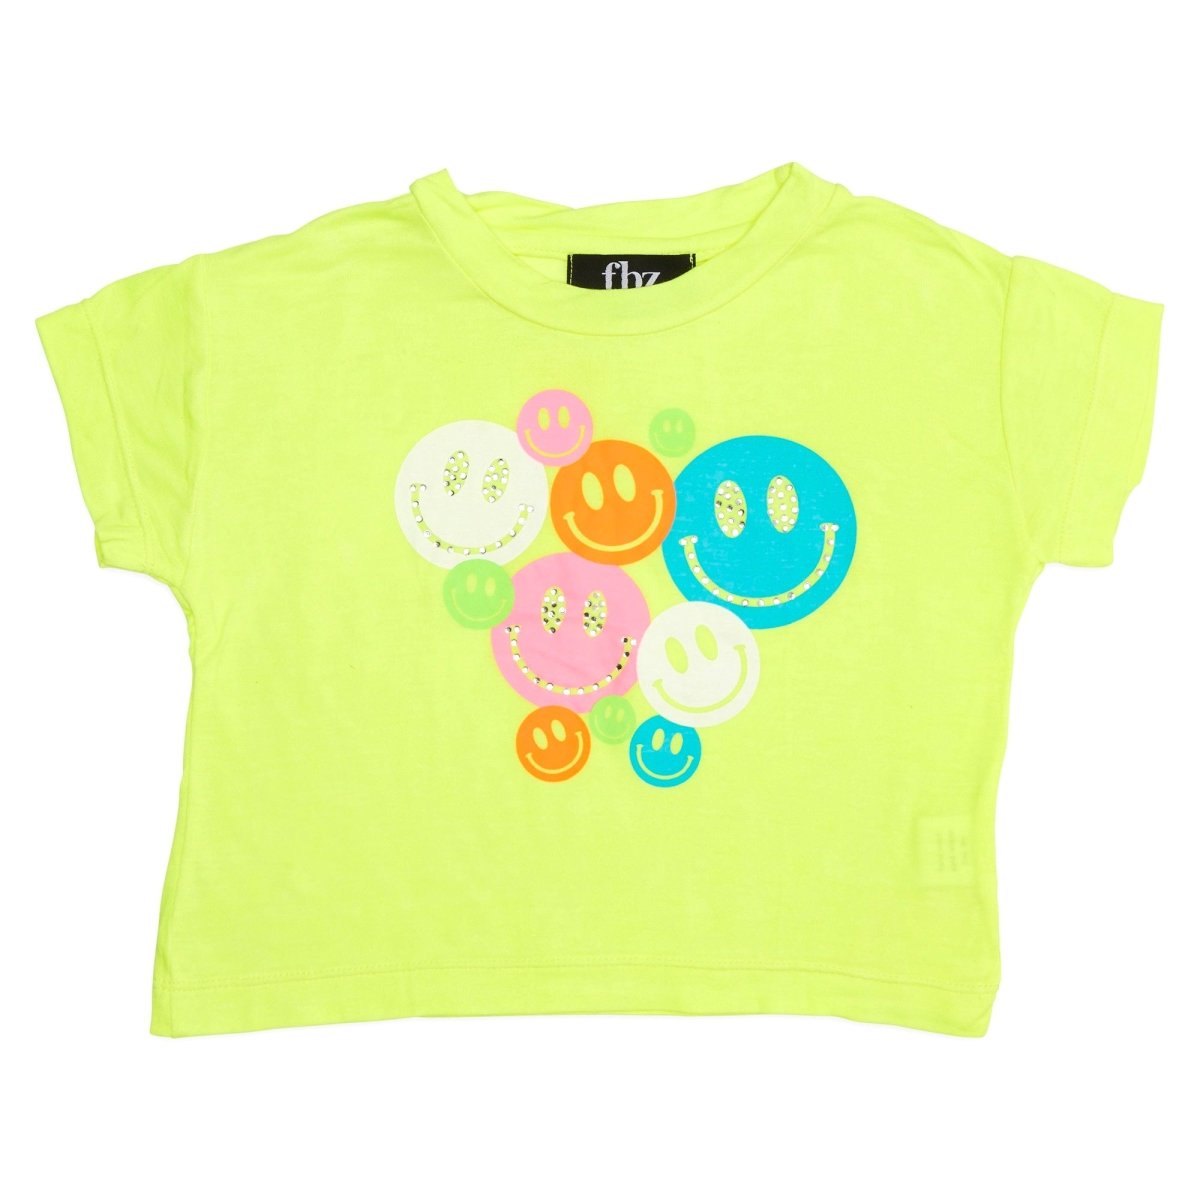 SMILEY FACE & CRYSTALS NEON TSHIRT - FLOWERS BY ZOE